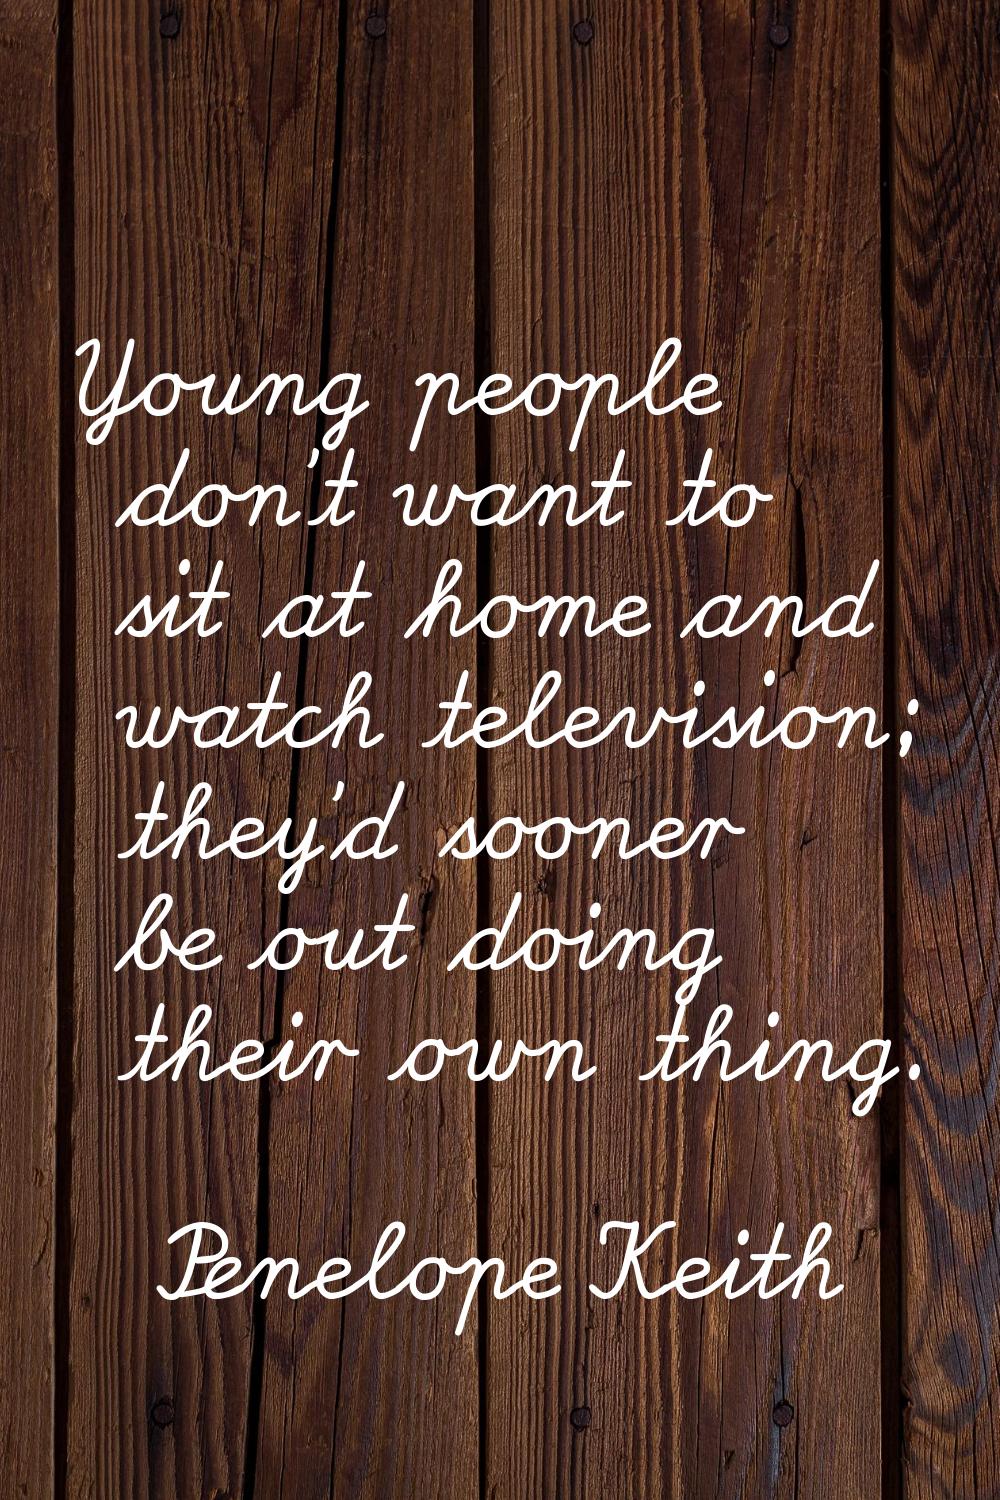 Young people don't want to sit at home and watch television; they'd sooner be out doing their own t